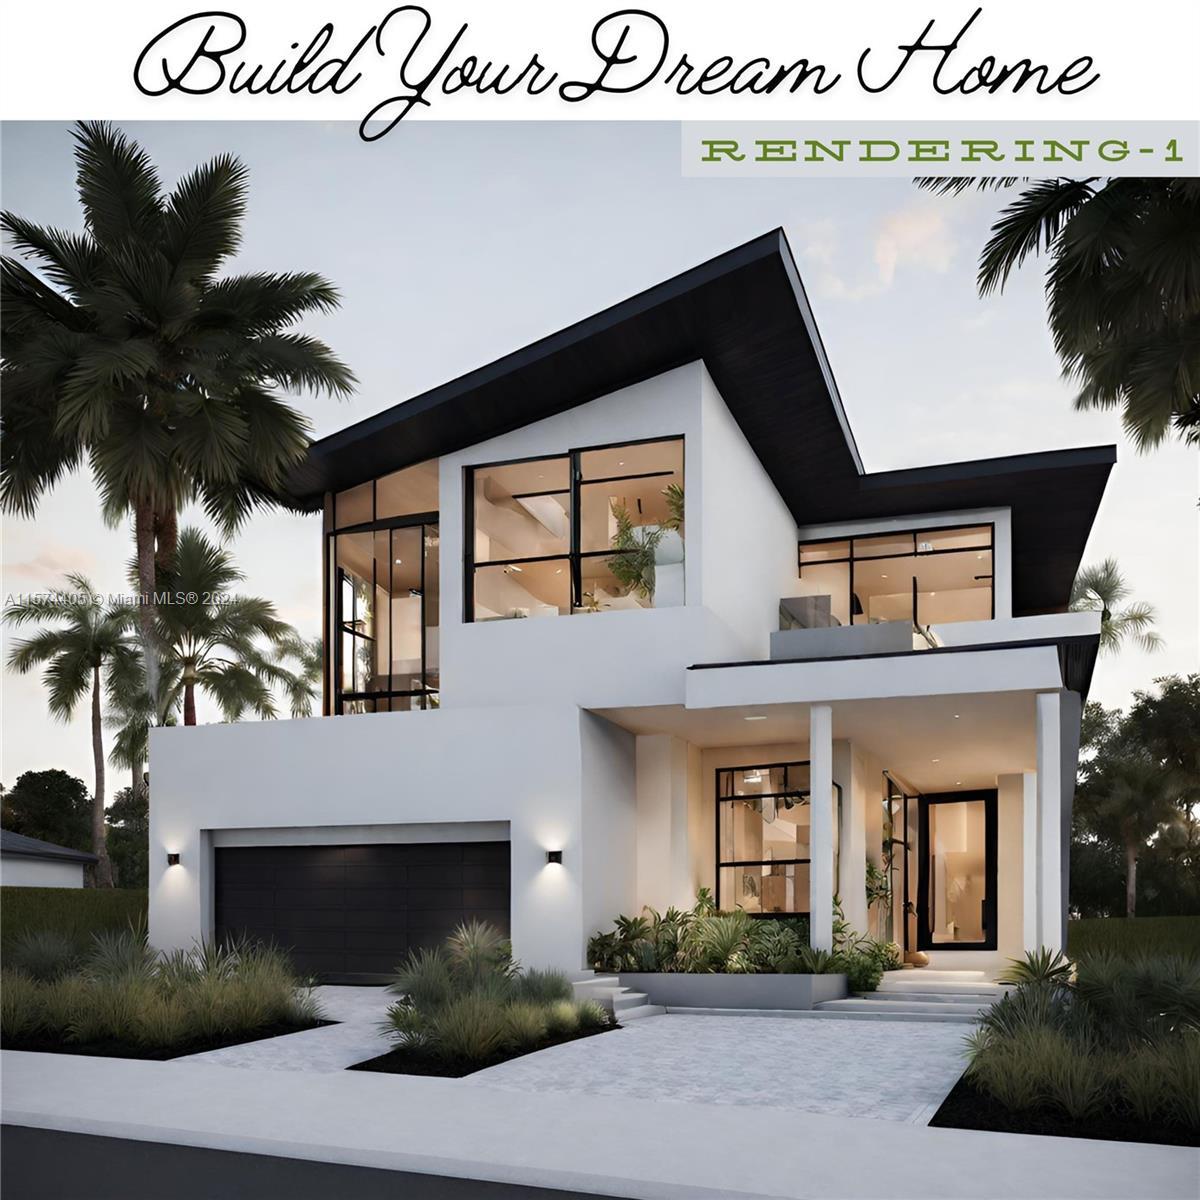 Extraordinary opportunity to BUILD YOUR DREAM HOME, and live amongst the MILLIONARES; or a PERFECT c